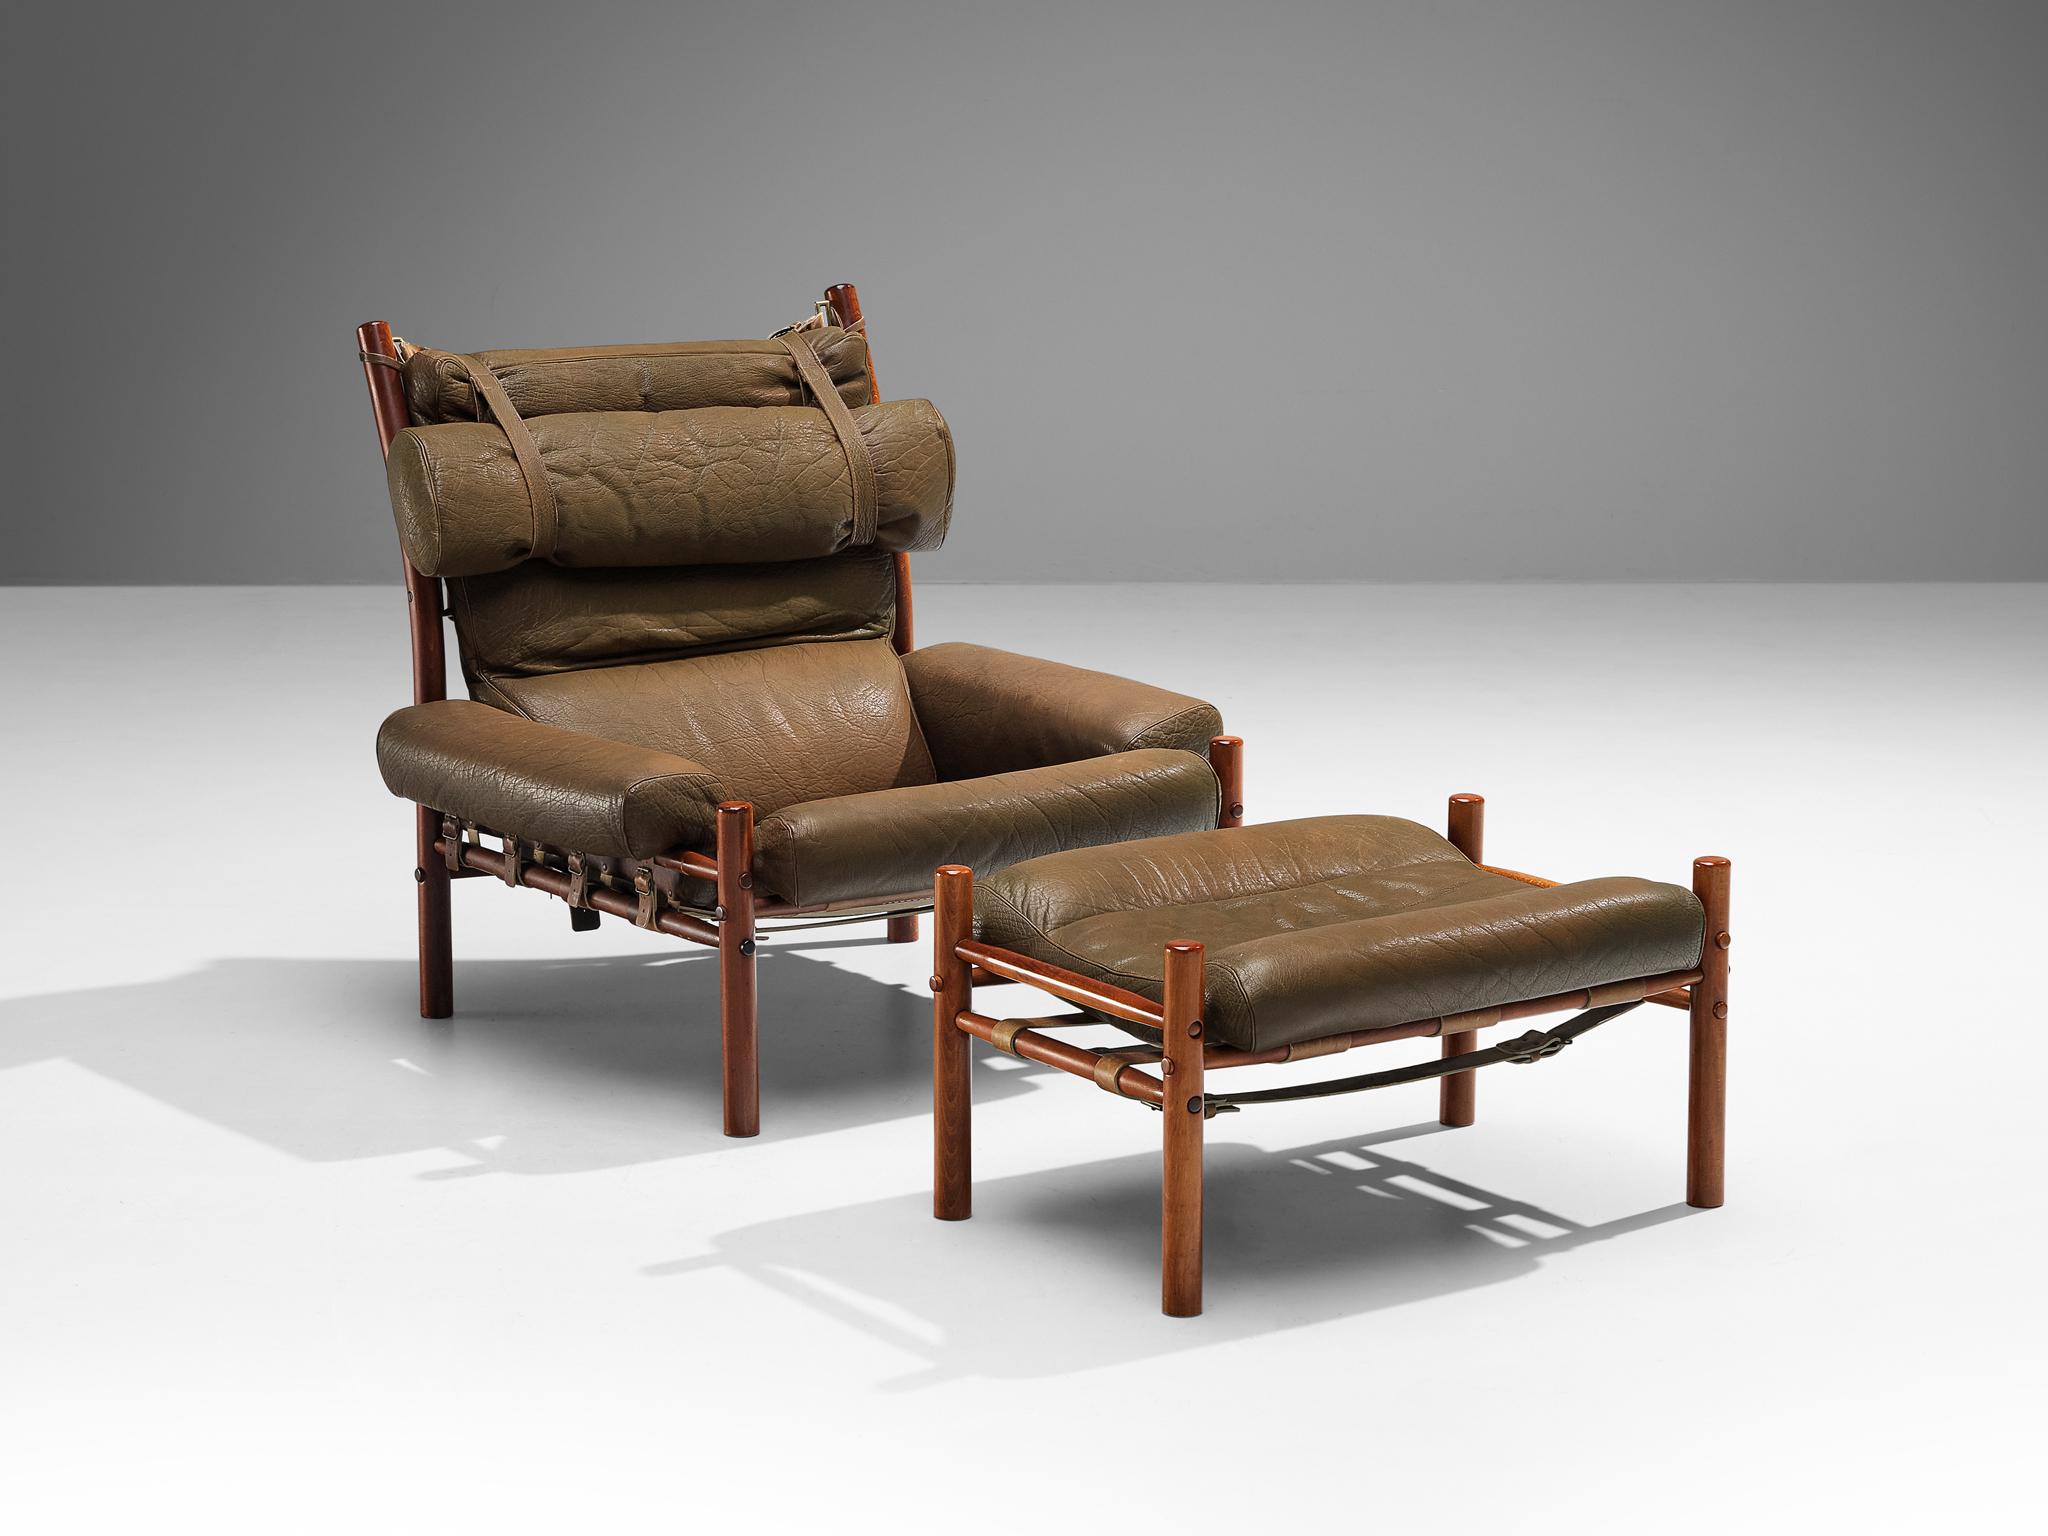 Arne Norell for Norell Möbel AB, 'Inca' lounge chair with ottoman, leather, stained beech, brass, Sweden, 1960s

The 'Inca' easy chair with ottoman, a true icon of Scandinavian Modern design, is a creation crafted by the celebrated designer Arne